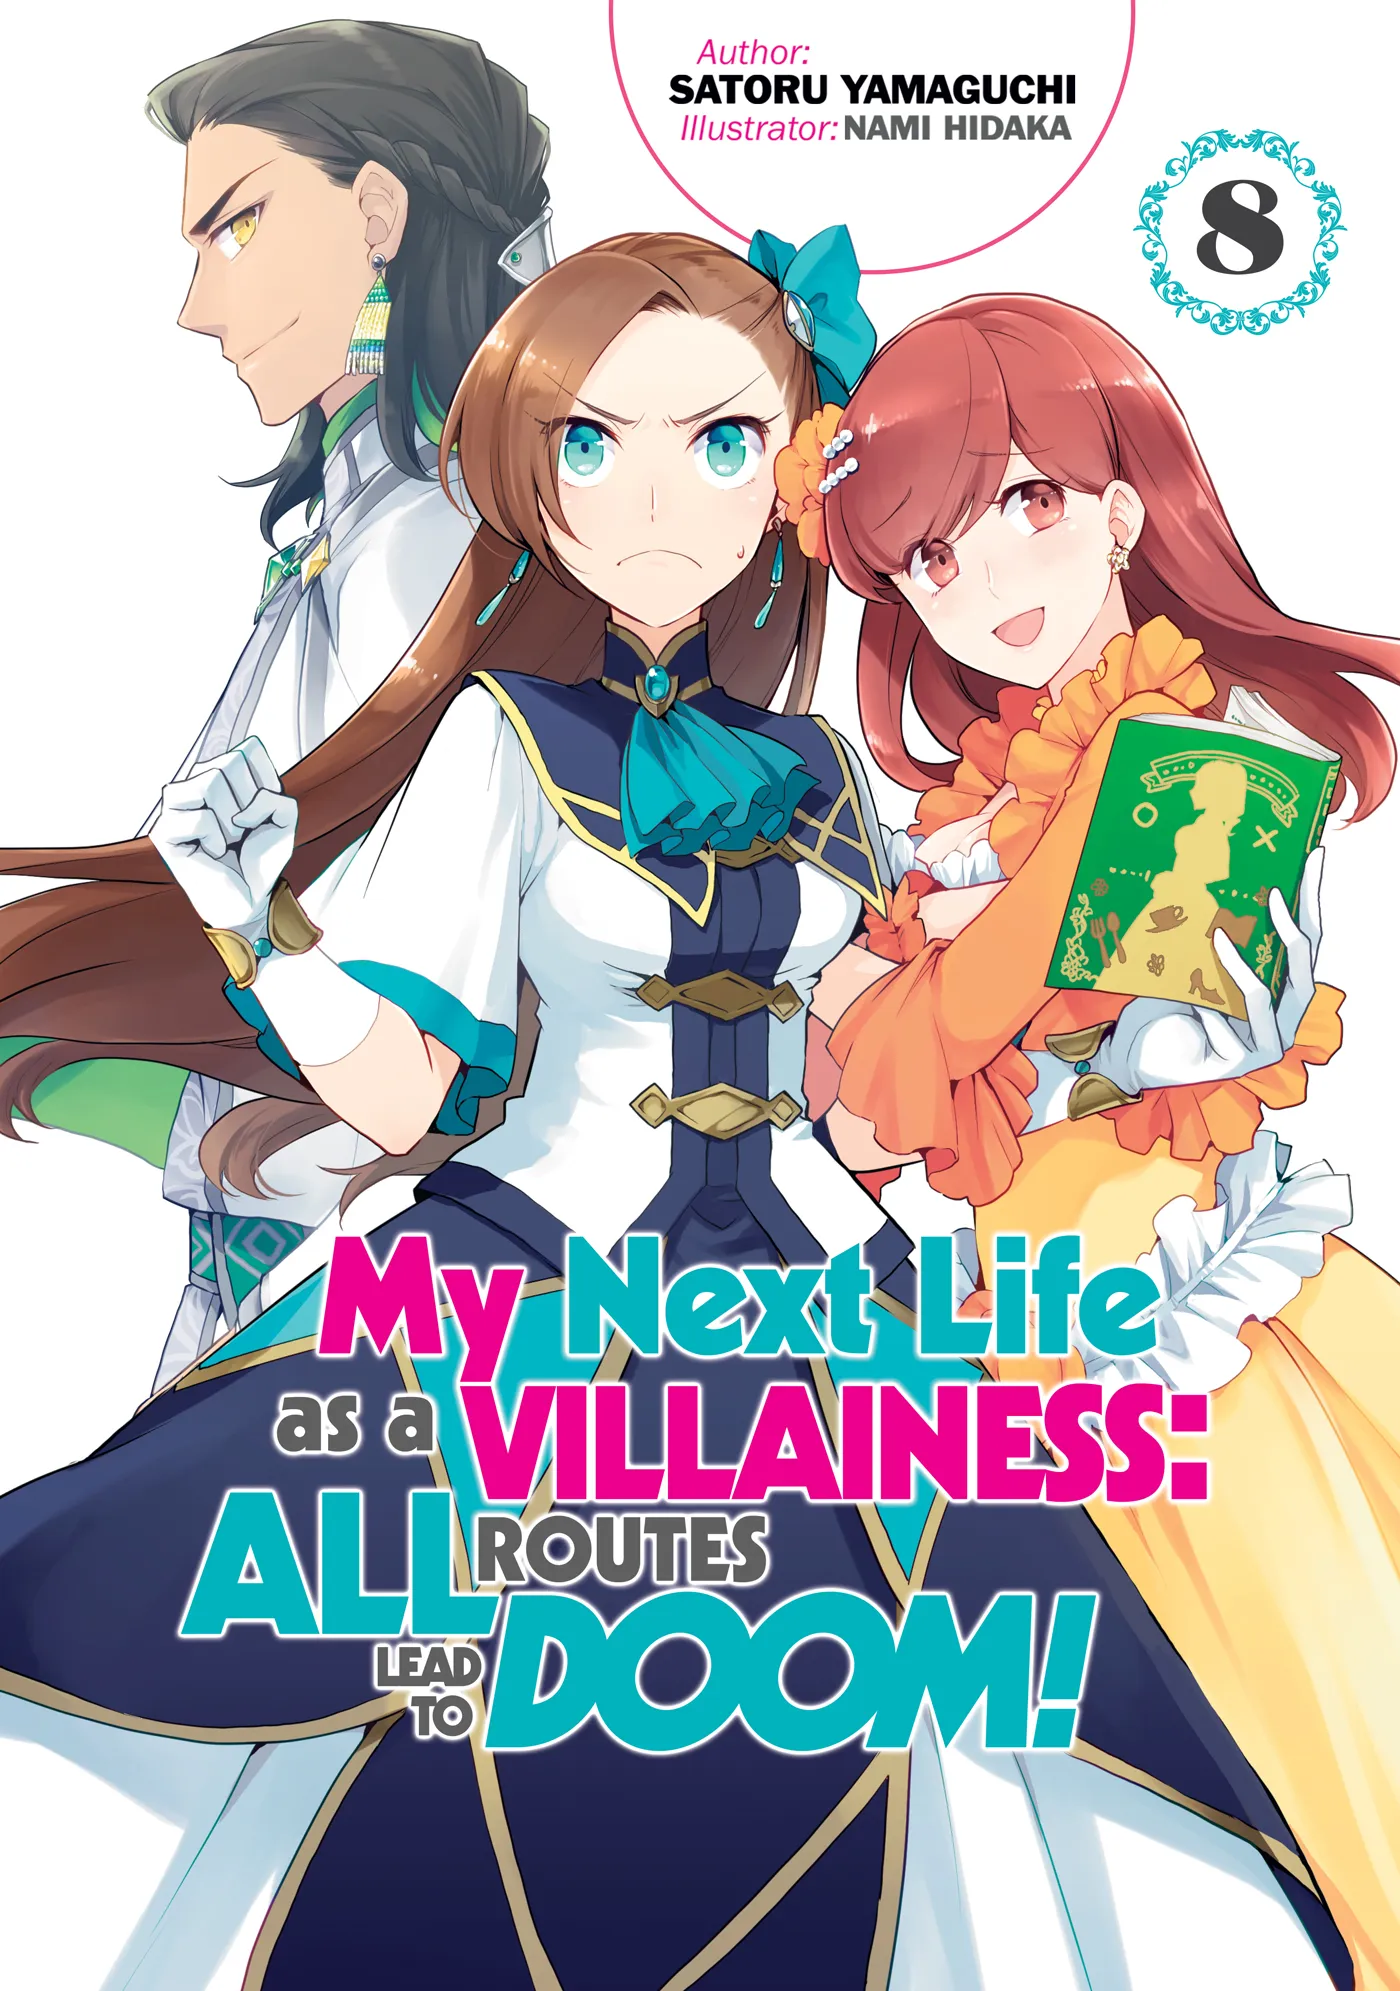 My Next Life as a Villainess: All Routes Lead to Doom! Volume 8 (My Next Life as a Villainess: All Routes Lead to Doom! #8)